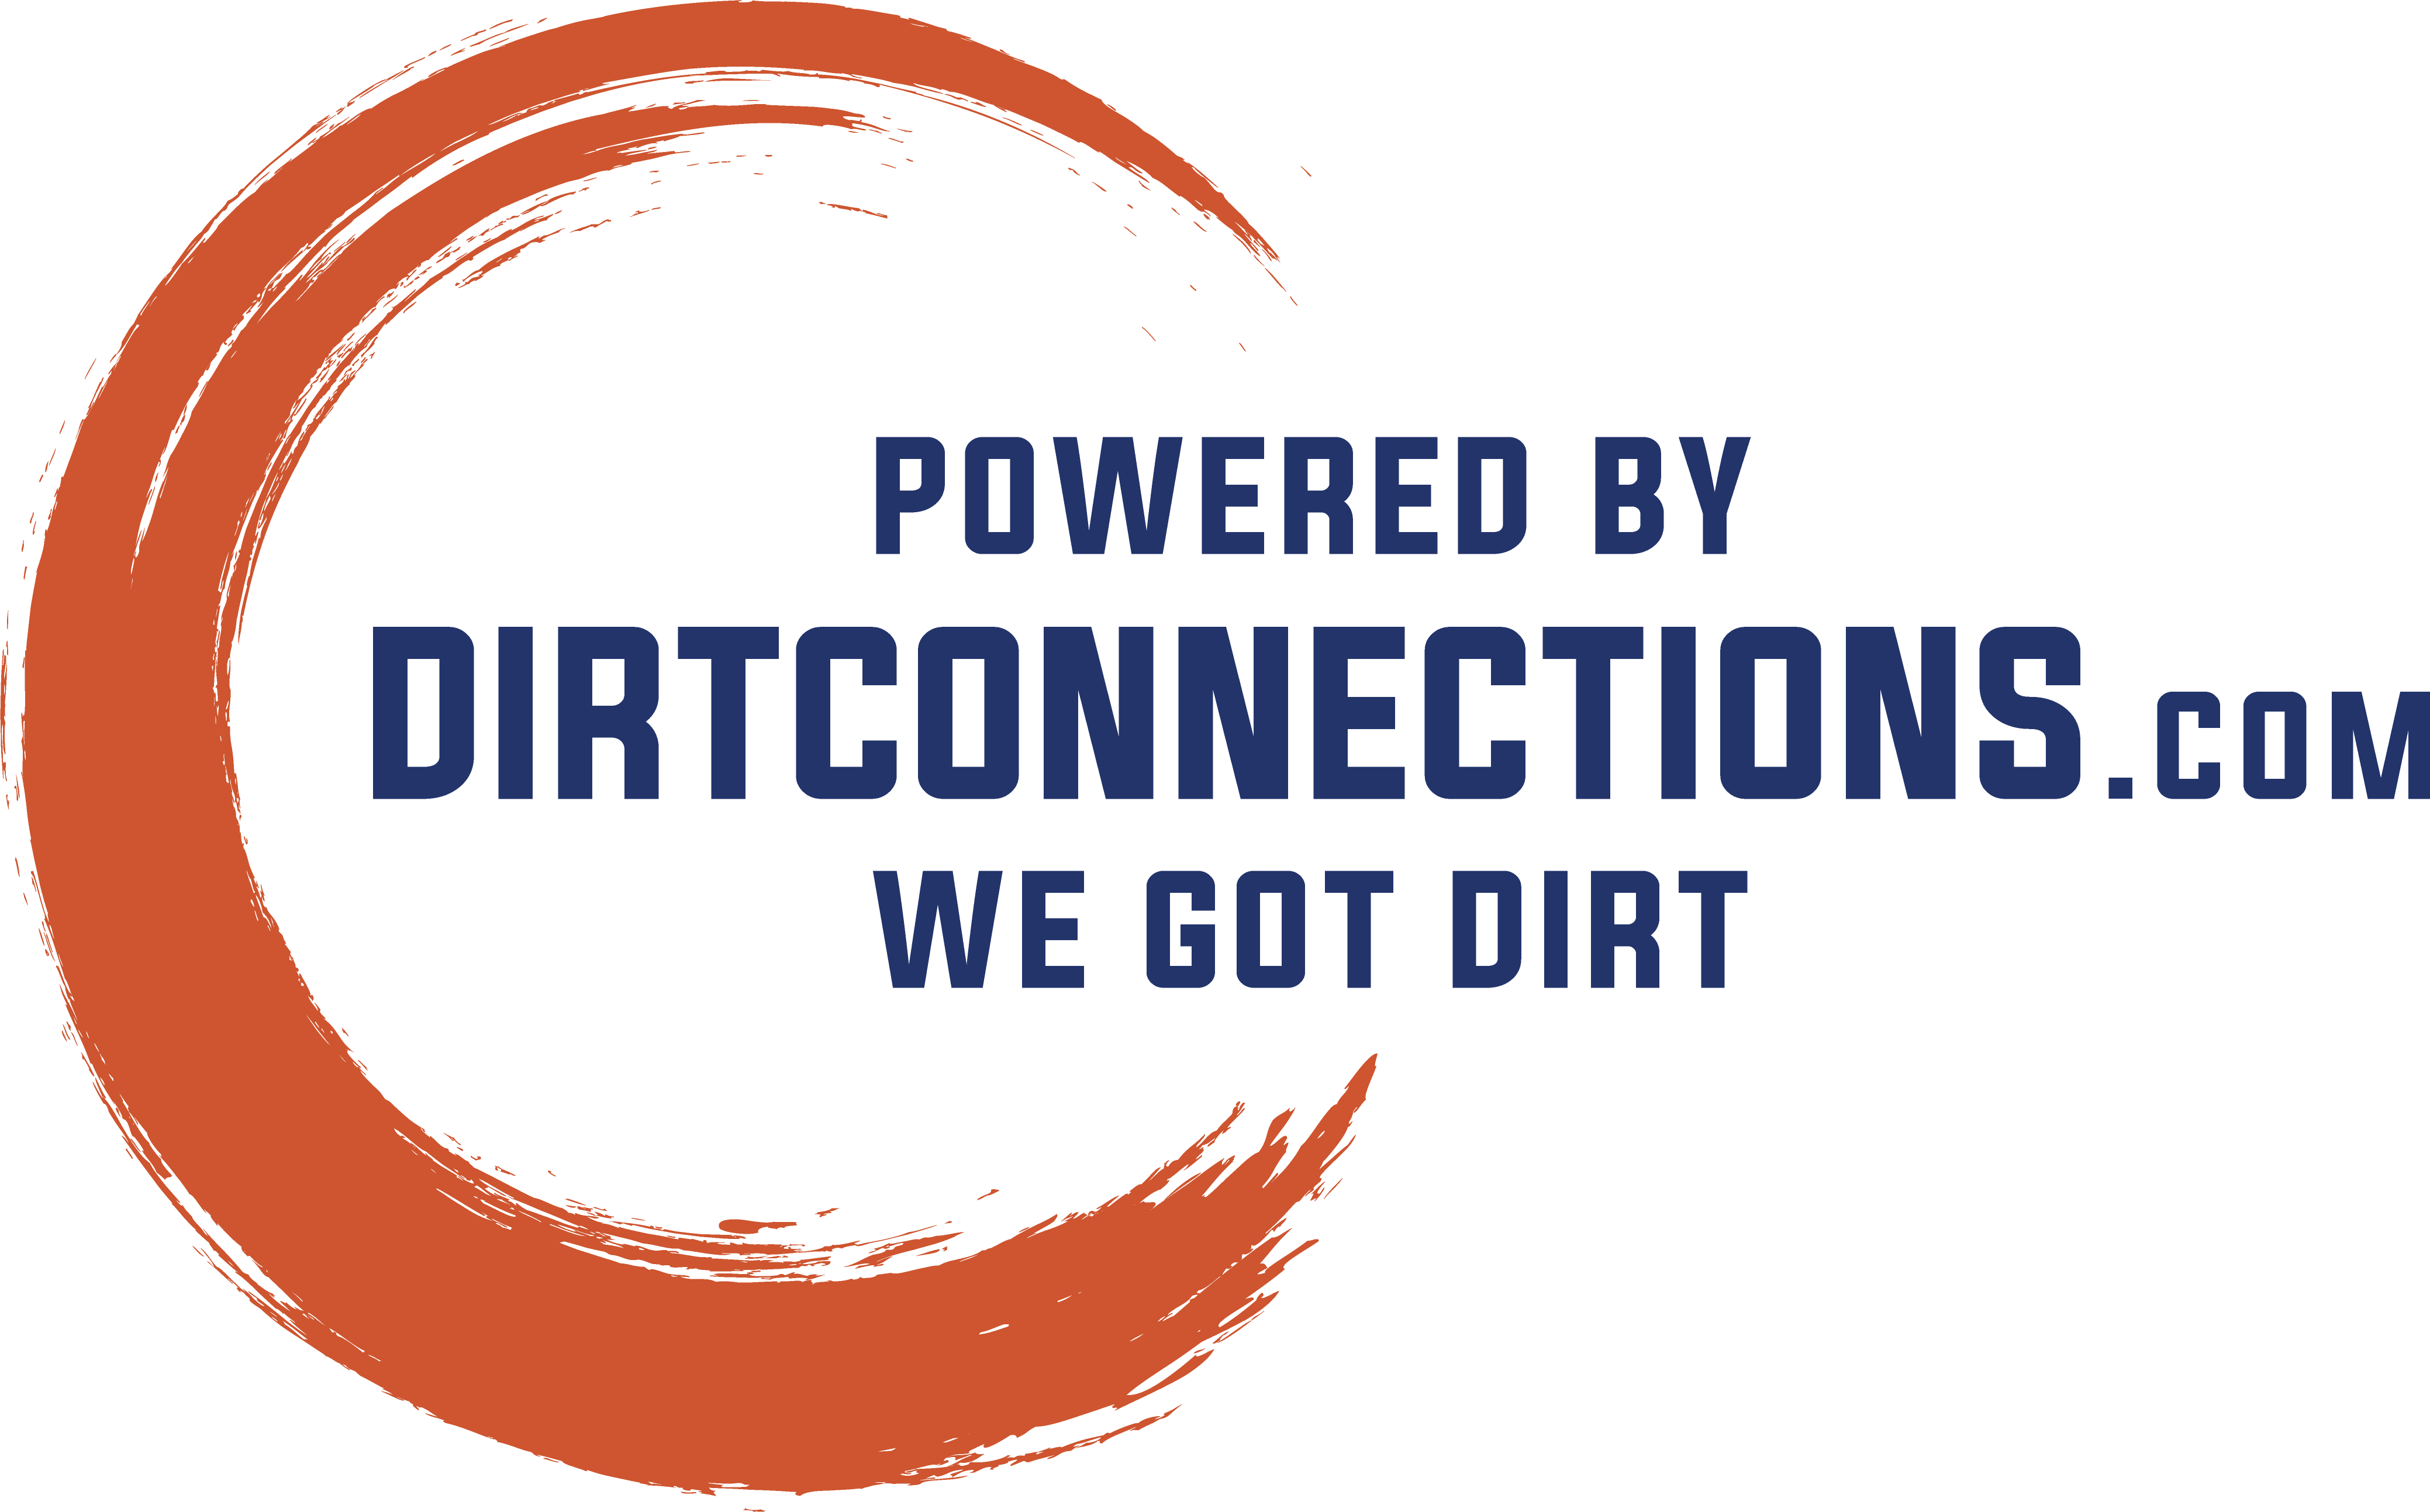 Powered by DIRTCONNECTIONS.COM